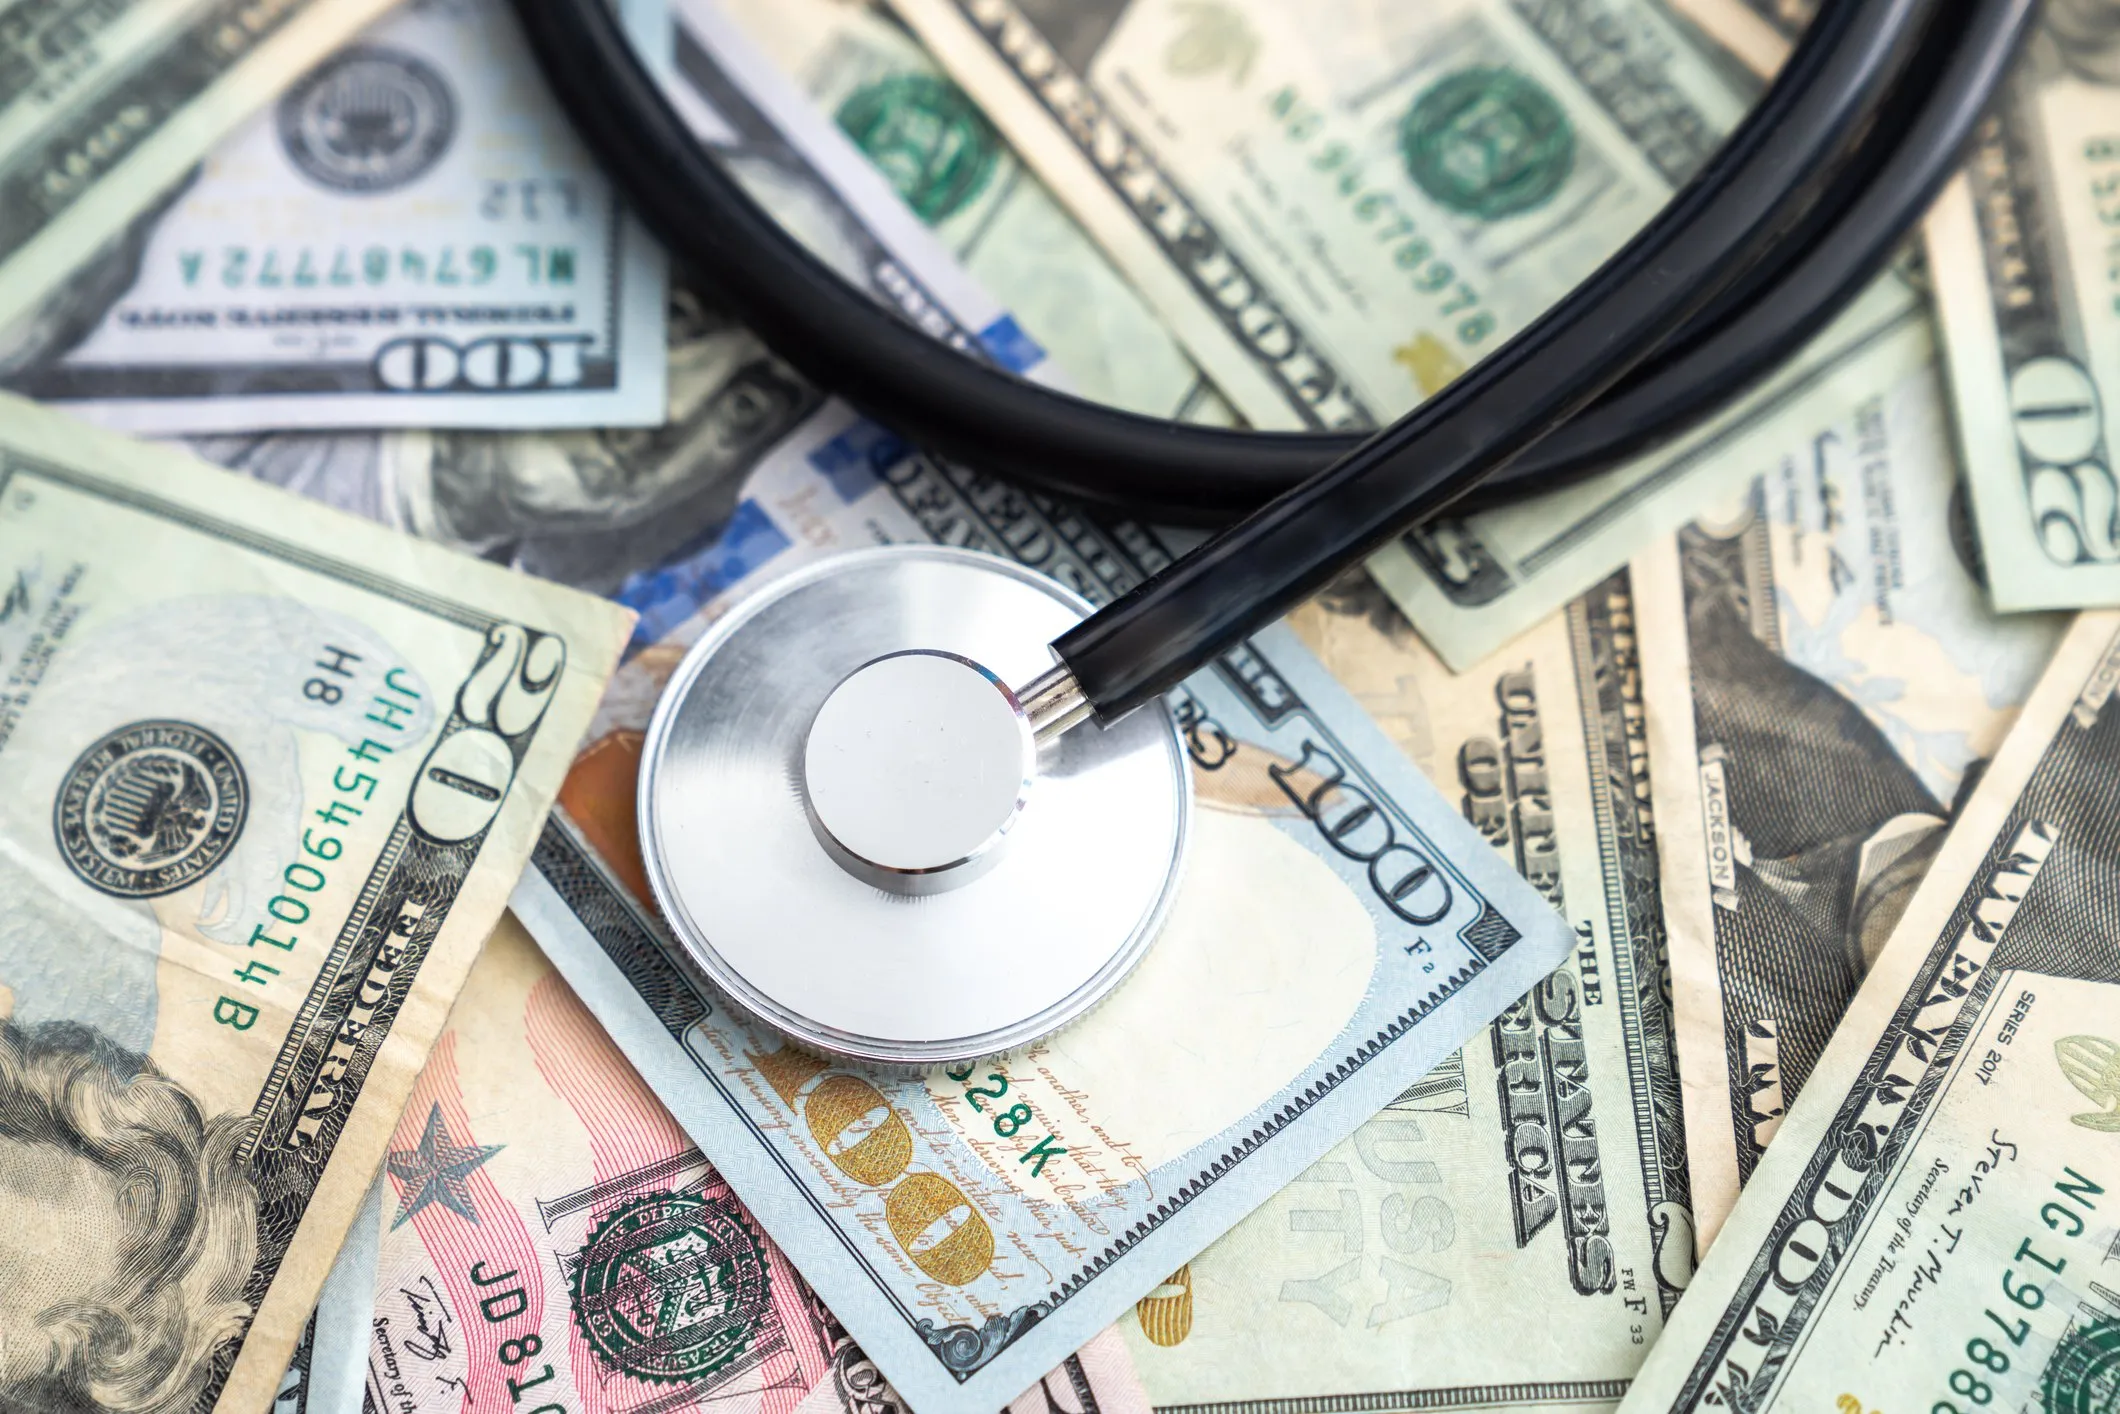 Stethoscope on top of a pile of united states cash covering the entire surface